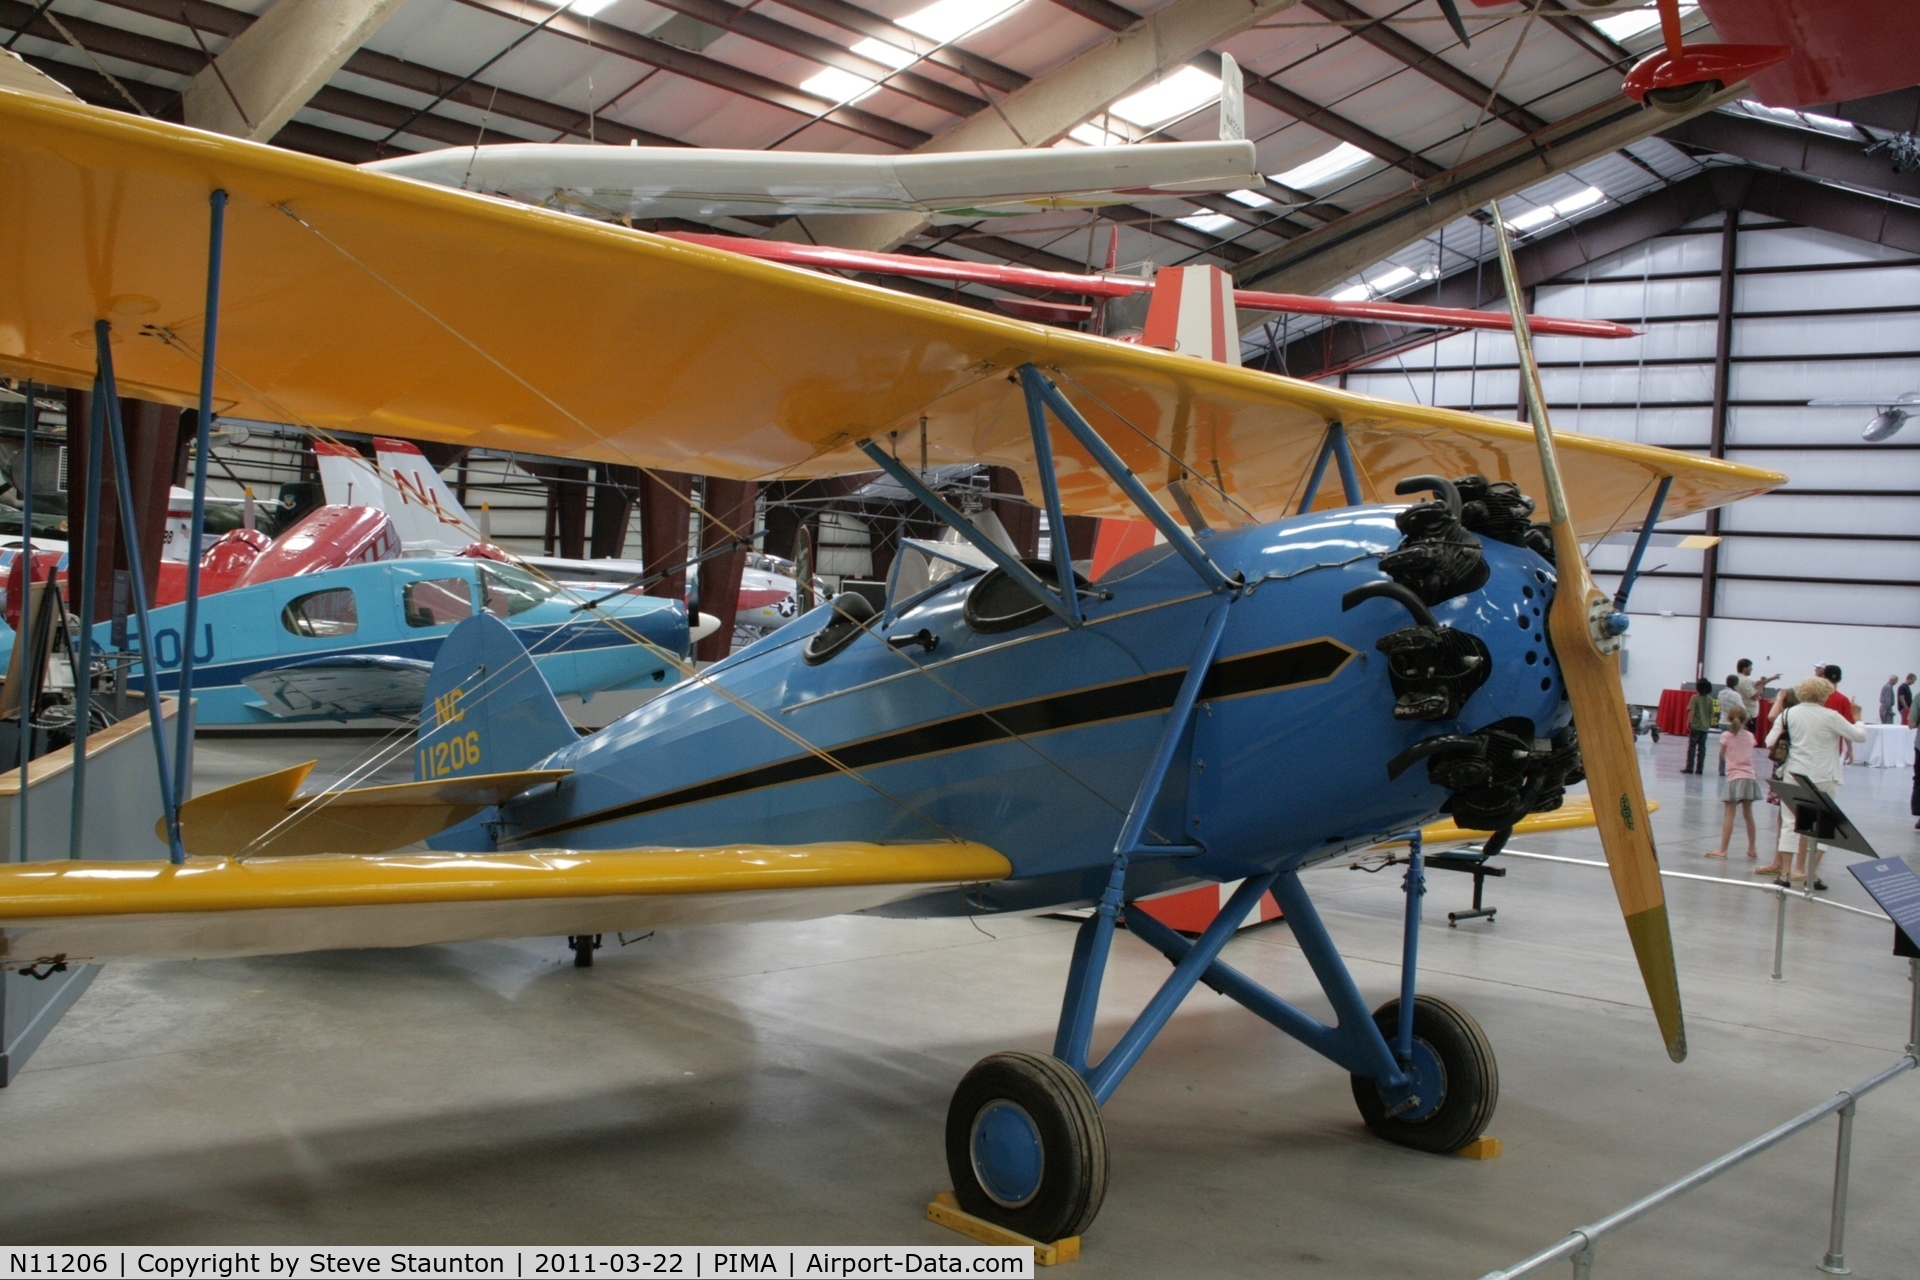 N11206, Waco RNF C/N 3392, Taken at Pima Air and Space Museum, in March 2011 whilst on an Aeroprint Aviation tour